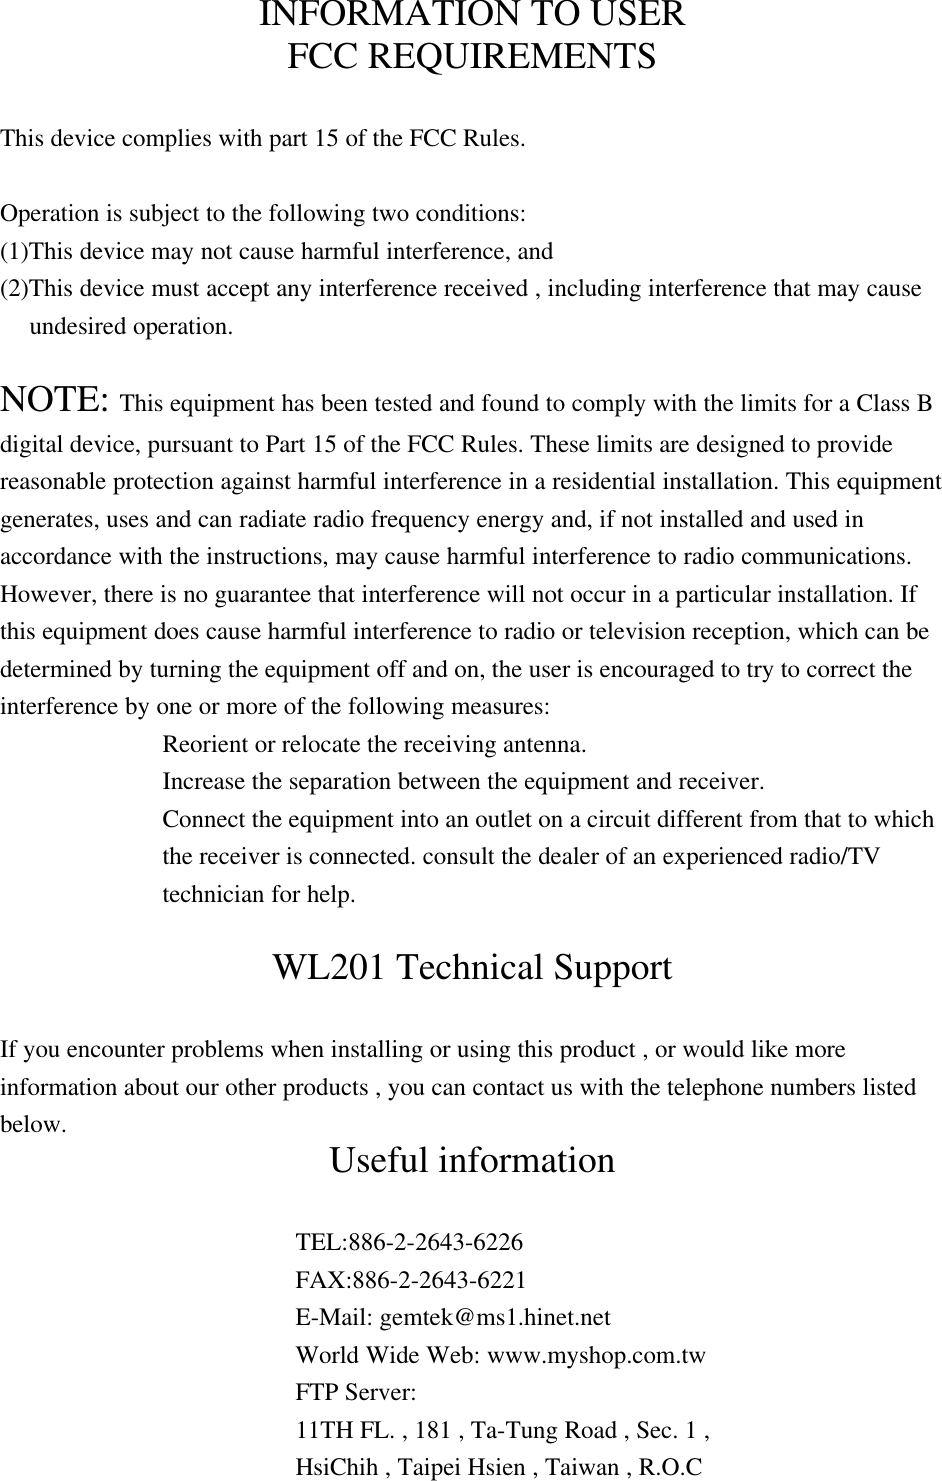 INFORMATION TO USERFCC REQUIREMENTSThis device complies with part 15 of the FCC Rules.Operation is subject to the following two conditions:(1)This device may not cause harmful interference, and(2)This device must accept any interference received , including interference that may causeundesired operation.NOTE: This equipment has been tested and found to comply with the limits for a Class Bdigital device, pursuant to Part 15 of the FCC Rules. These limits are designed to providereasonable protection against harmful interference in a residential installation. This equipmentgenerates, uses and can radiate radio frequency energy and, if not installed and used inaccordance with the instructions, may cause harmful interference to radio communications.However, there is no guarantee that interference will not occur in a particular installation. Ifthis equipment does cause harmful interference to radio or television reception, which can bedetermined by turning the equipment off and on, the user is encouraged to try to correct theinterference by one or more of the following measures:Reorient or relocate the receiving antenna.Increase the separation between the equipment and receiver.Connect the equipment into an outlet on a circuit different from that to whichthe receiver is connected. consult the dealer of an experienced radio/TVtechnician for help.WL201 Technical SupportIf you encounter problems when installing or using this product , or would like moreinformation about our other products , you can contact us with the telephone numbers listedbelow. Useful informationTEL:886-2-2643-6226FAX:886-2-2643-6221E-Mail: gemtek@ms1.hinet.netWorld Wide Web: www.myshop.com.twFTP Server:11TH FL. , 181 , Ta-Tung Road , Sec. 1 ,HsiChih , Taipei Hsien , Taiwan , R.O.C